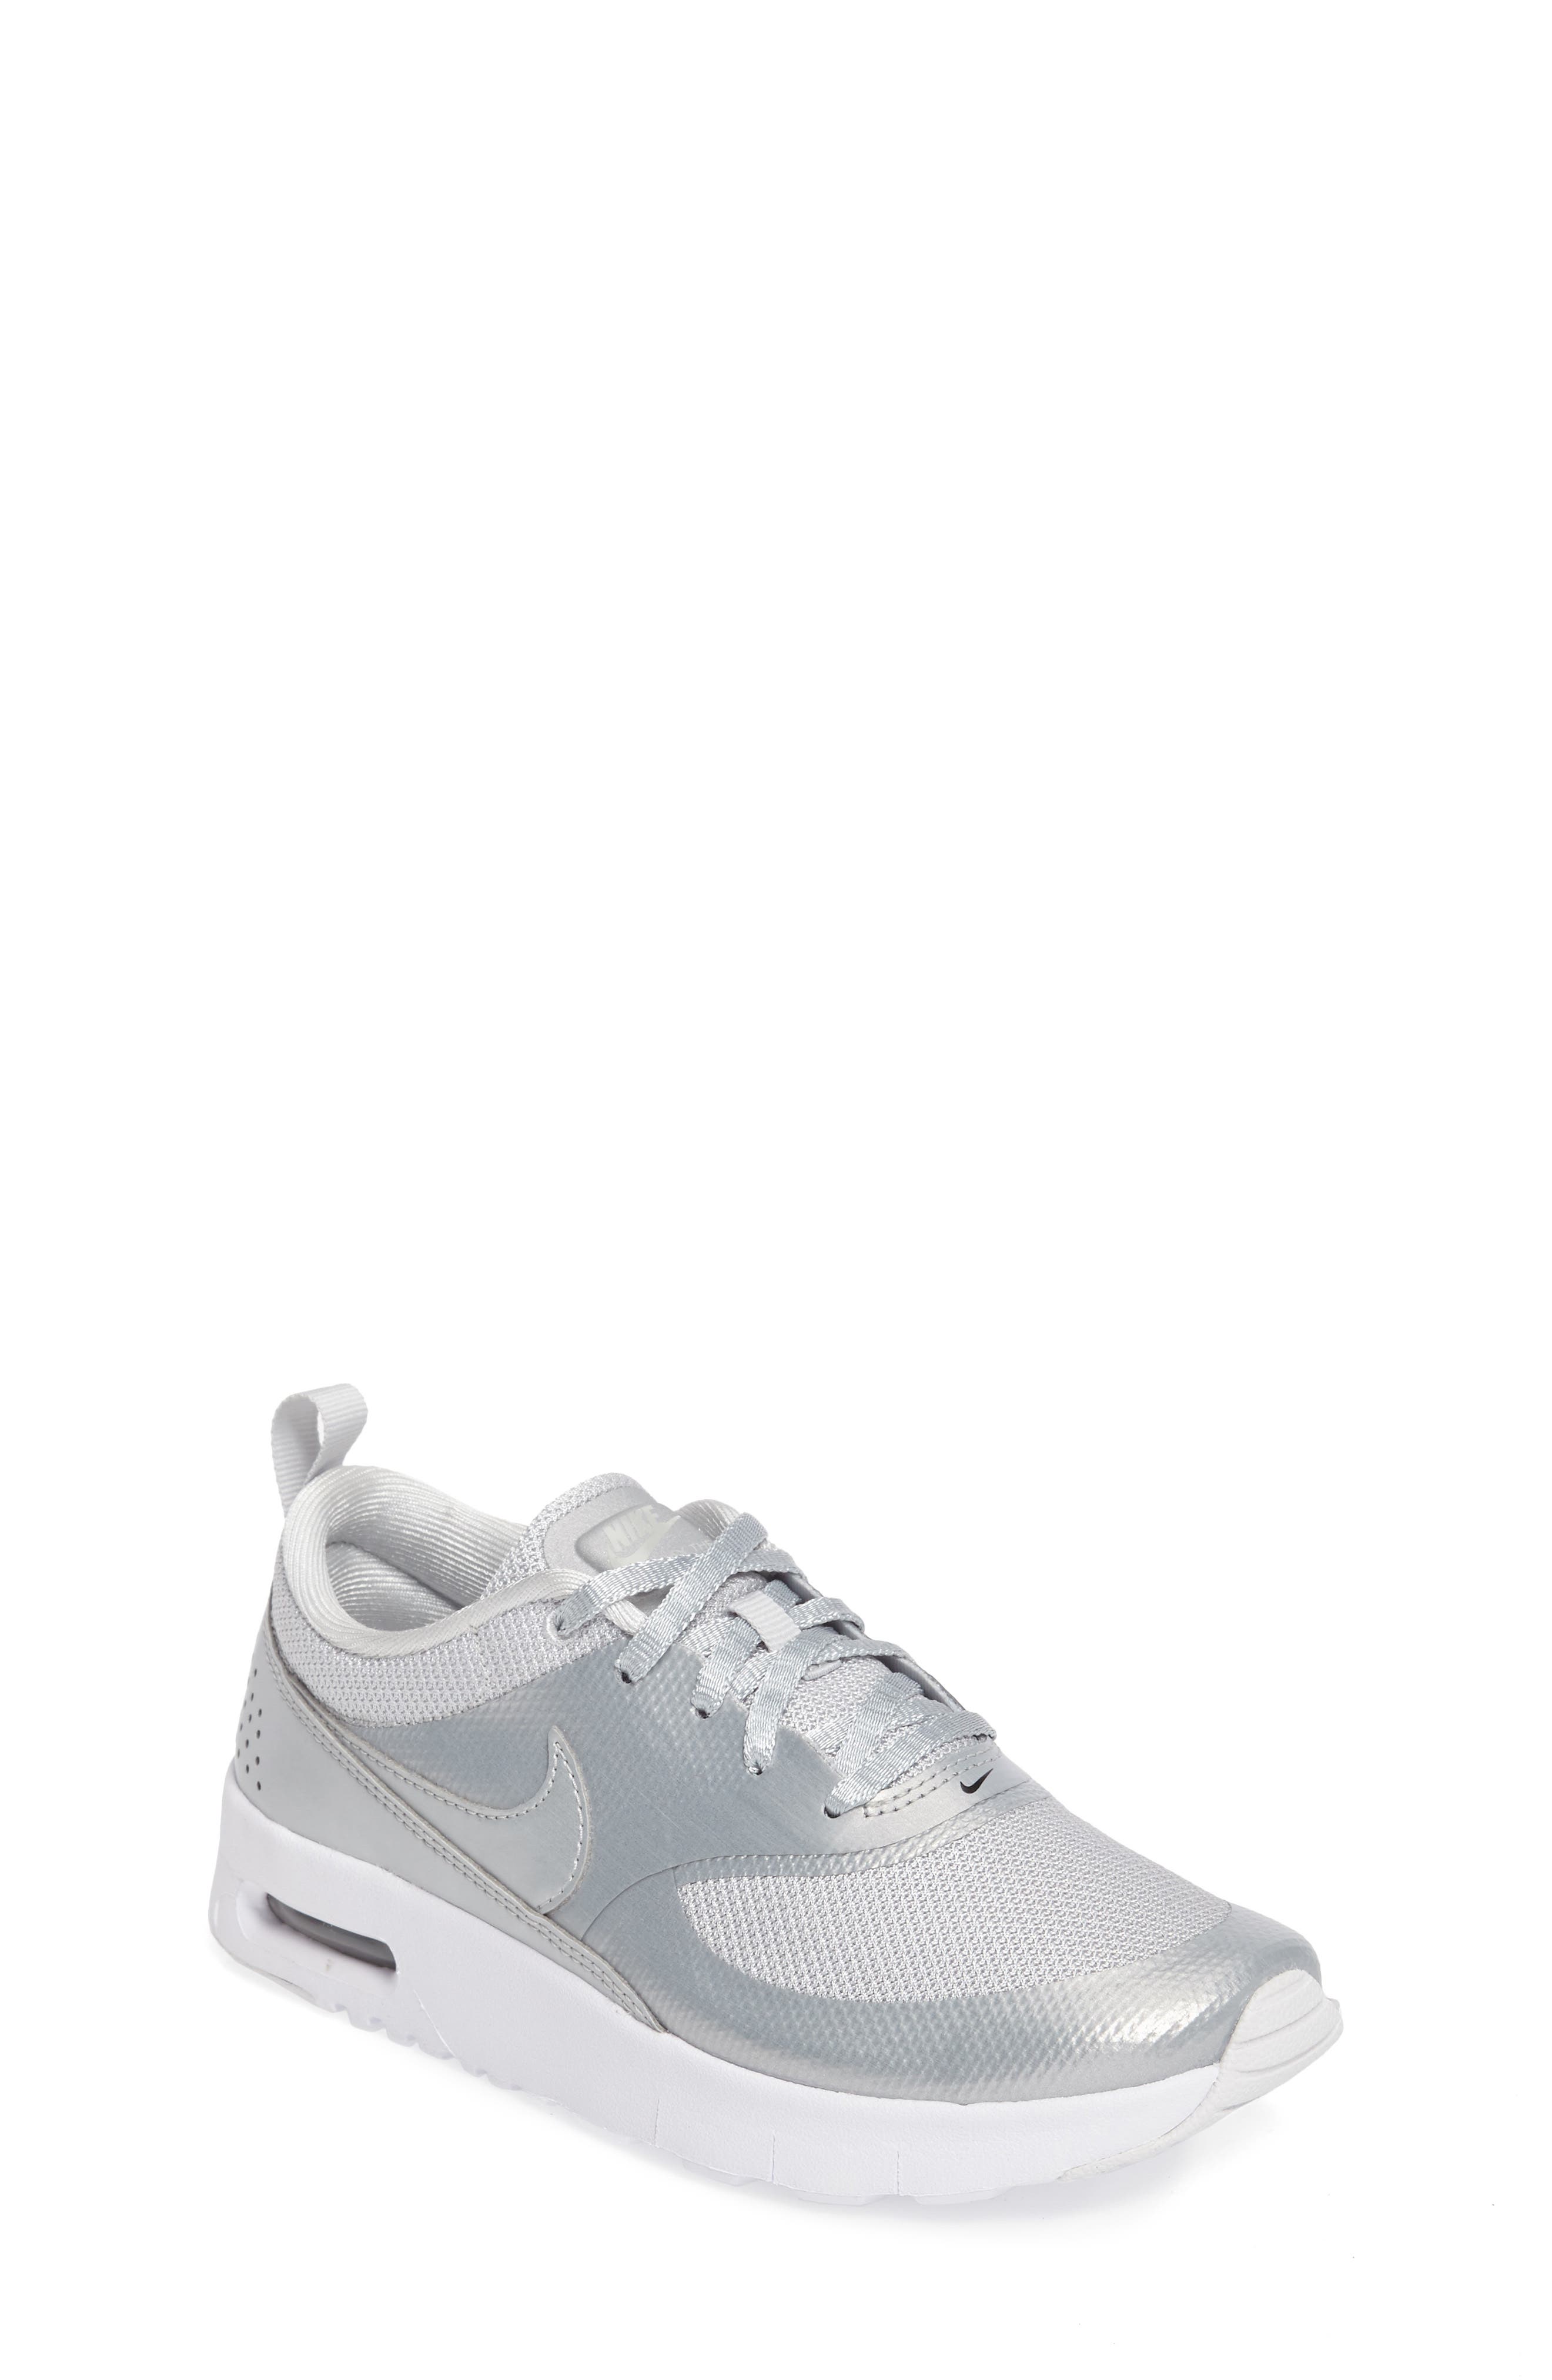 nordstrom nike thea